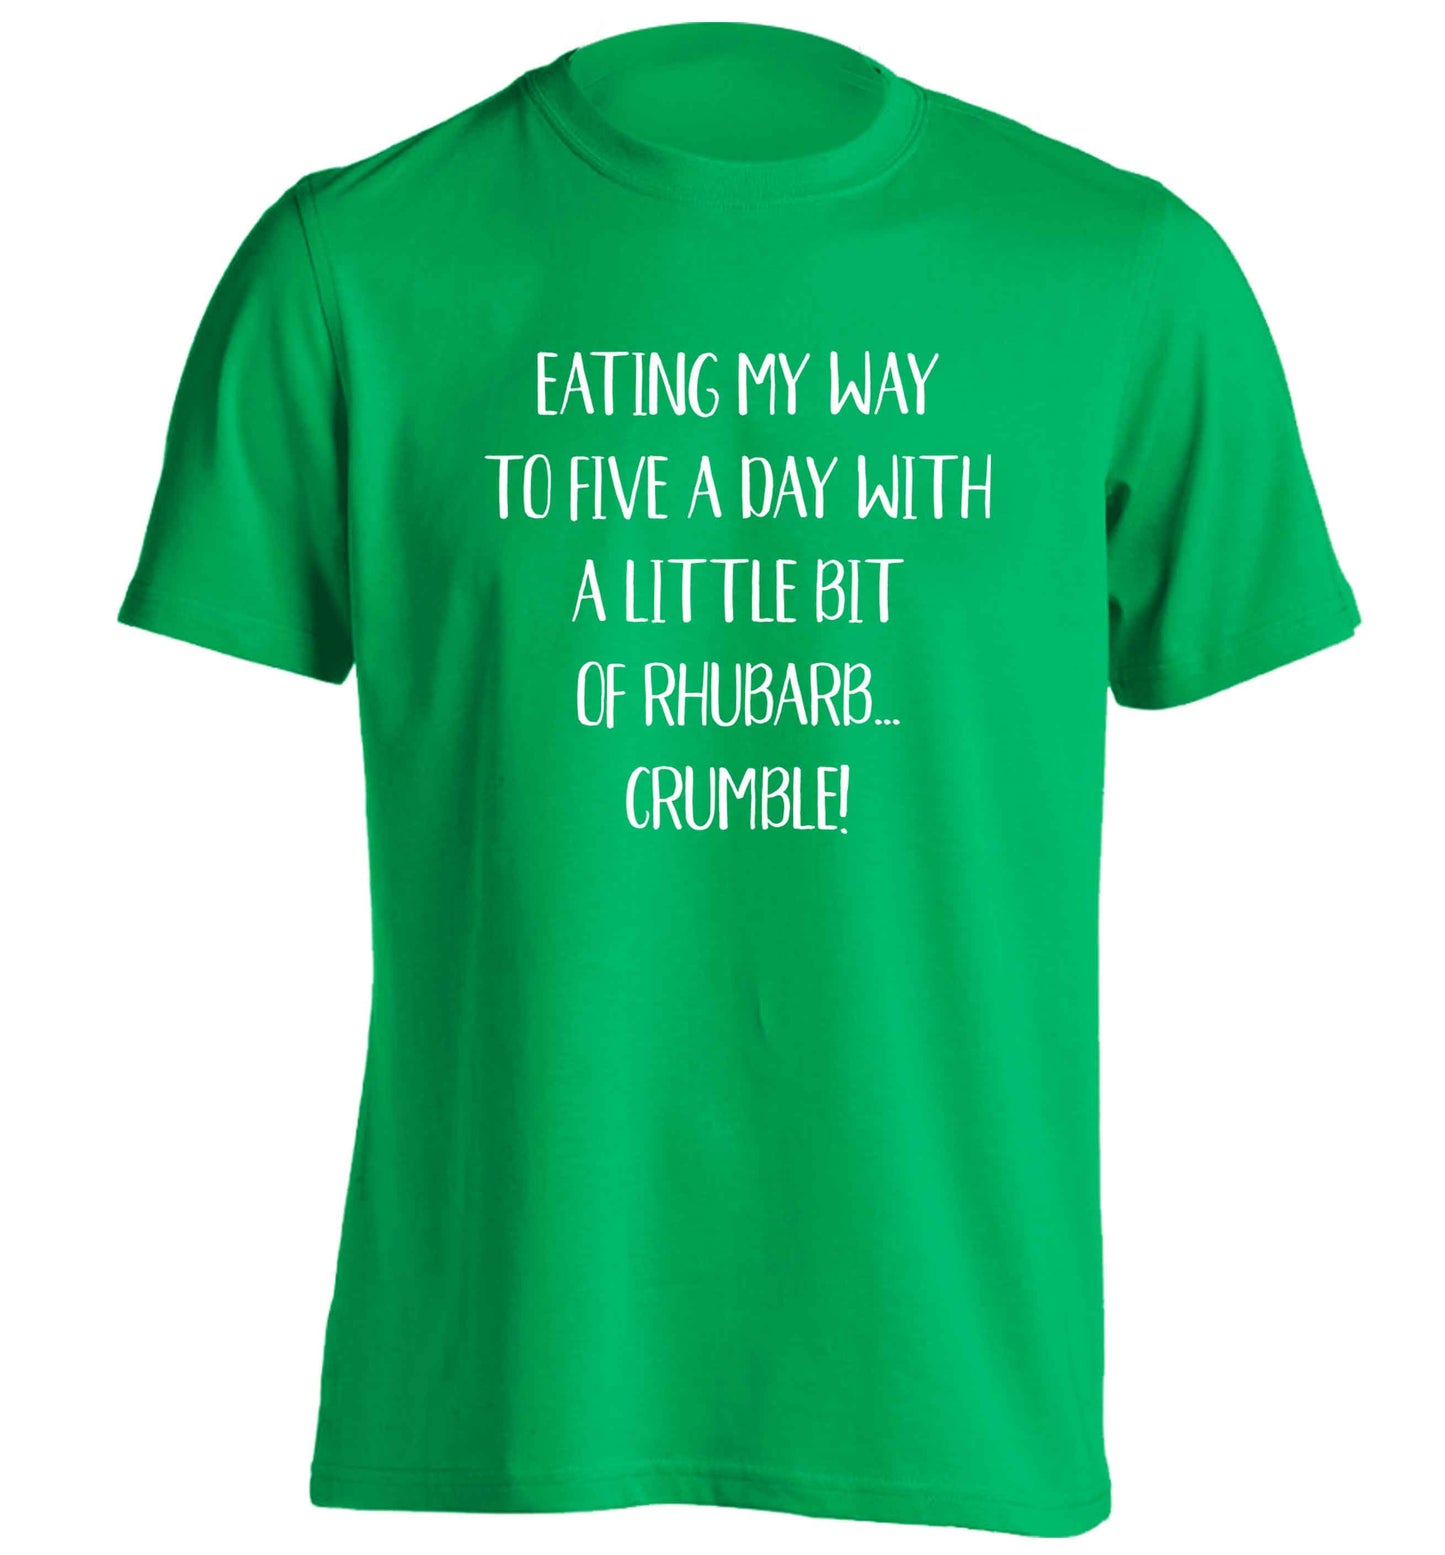 Eating my way to five a day with a little bit of rhubarb crumble adults unisex green Tshirt 2XL